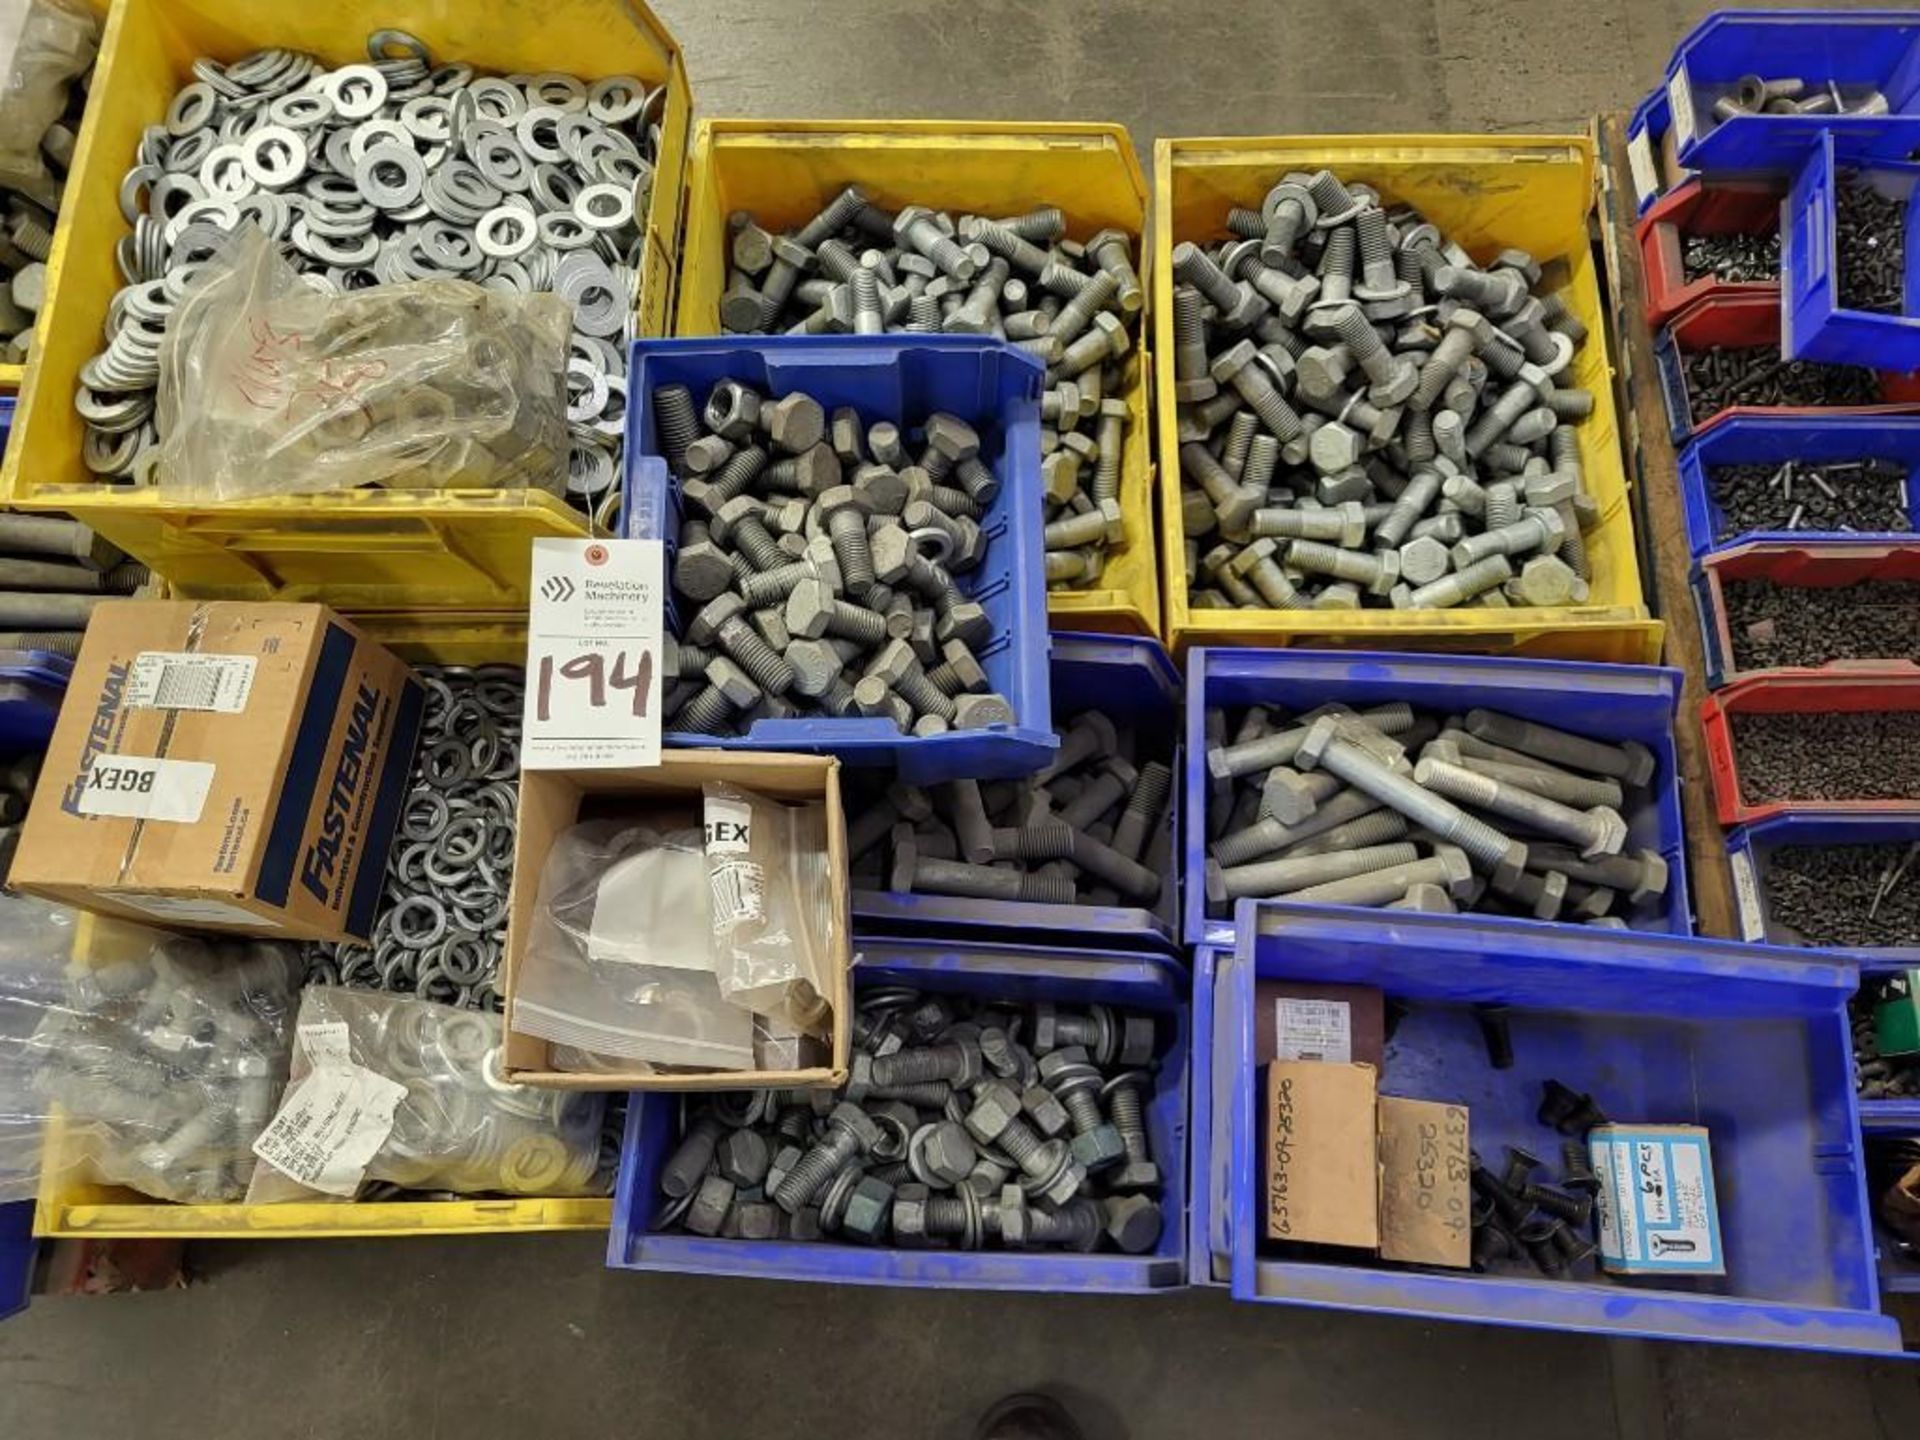 HARDWARE BINS - WASHERS, NUTS AND BOLTS (LARGE)